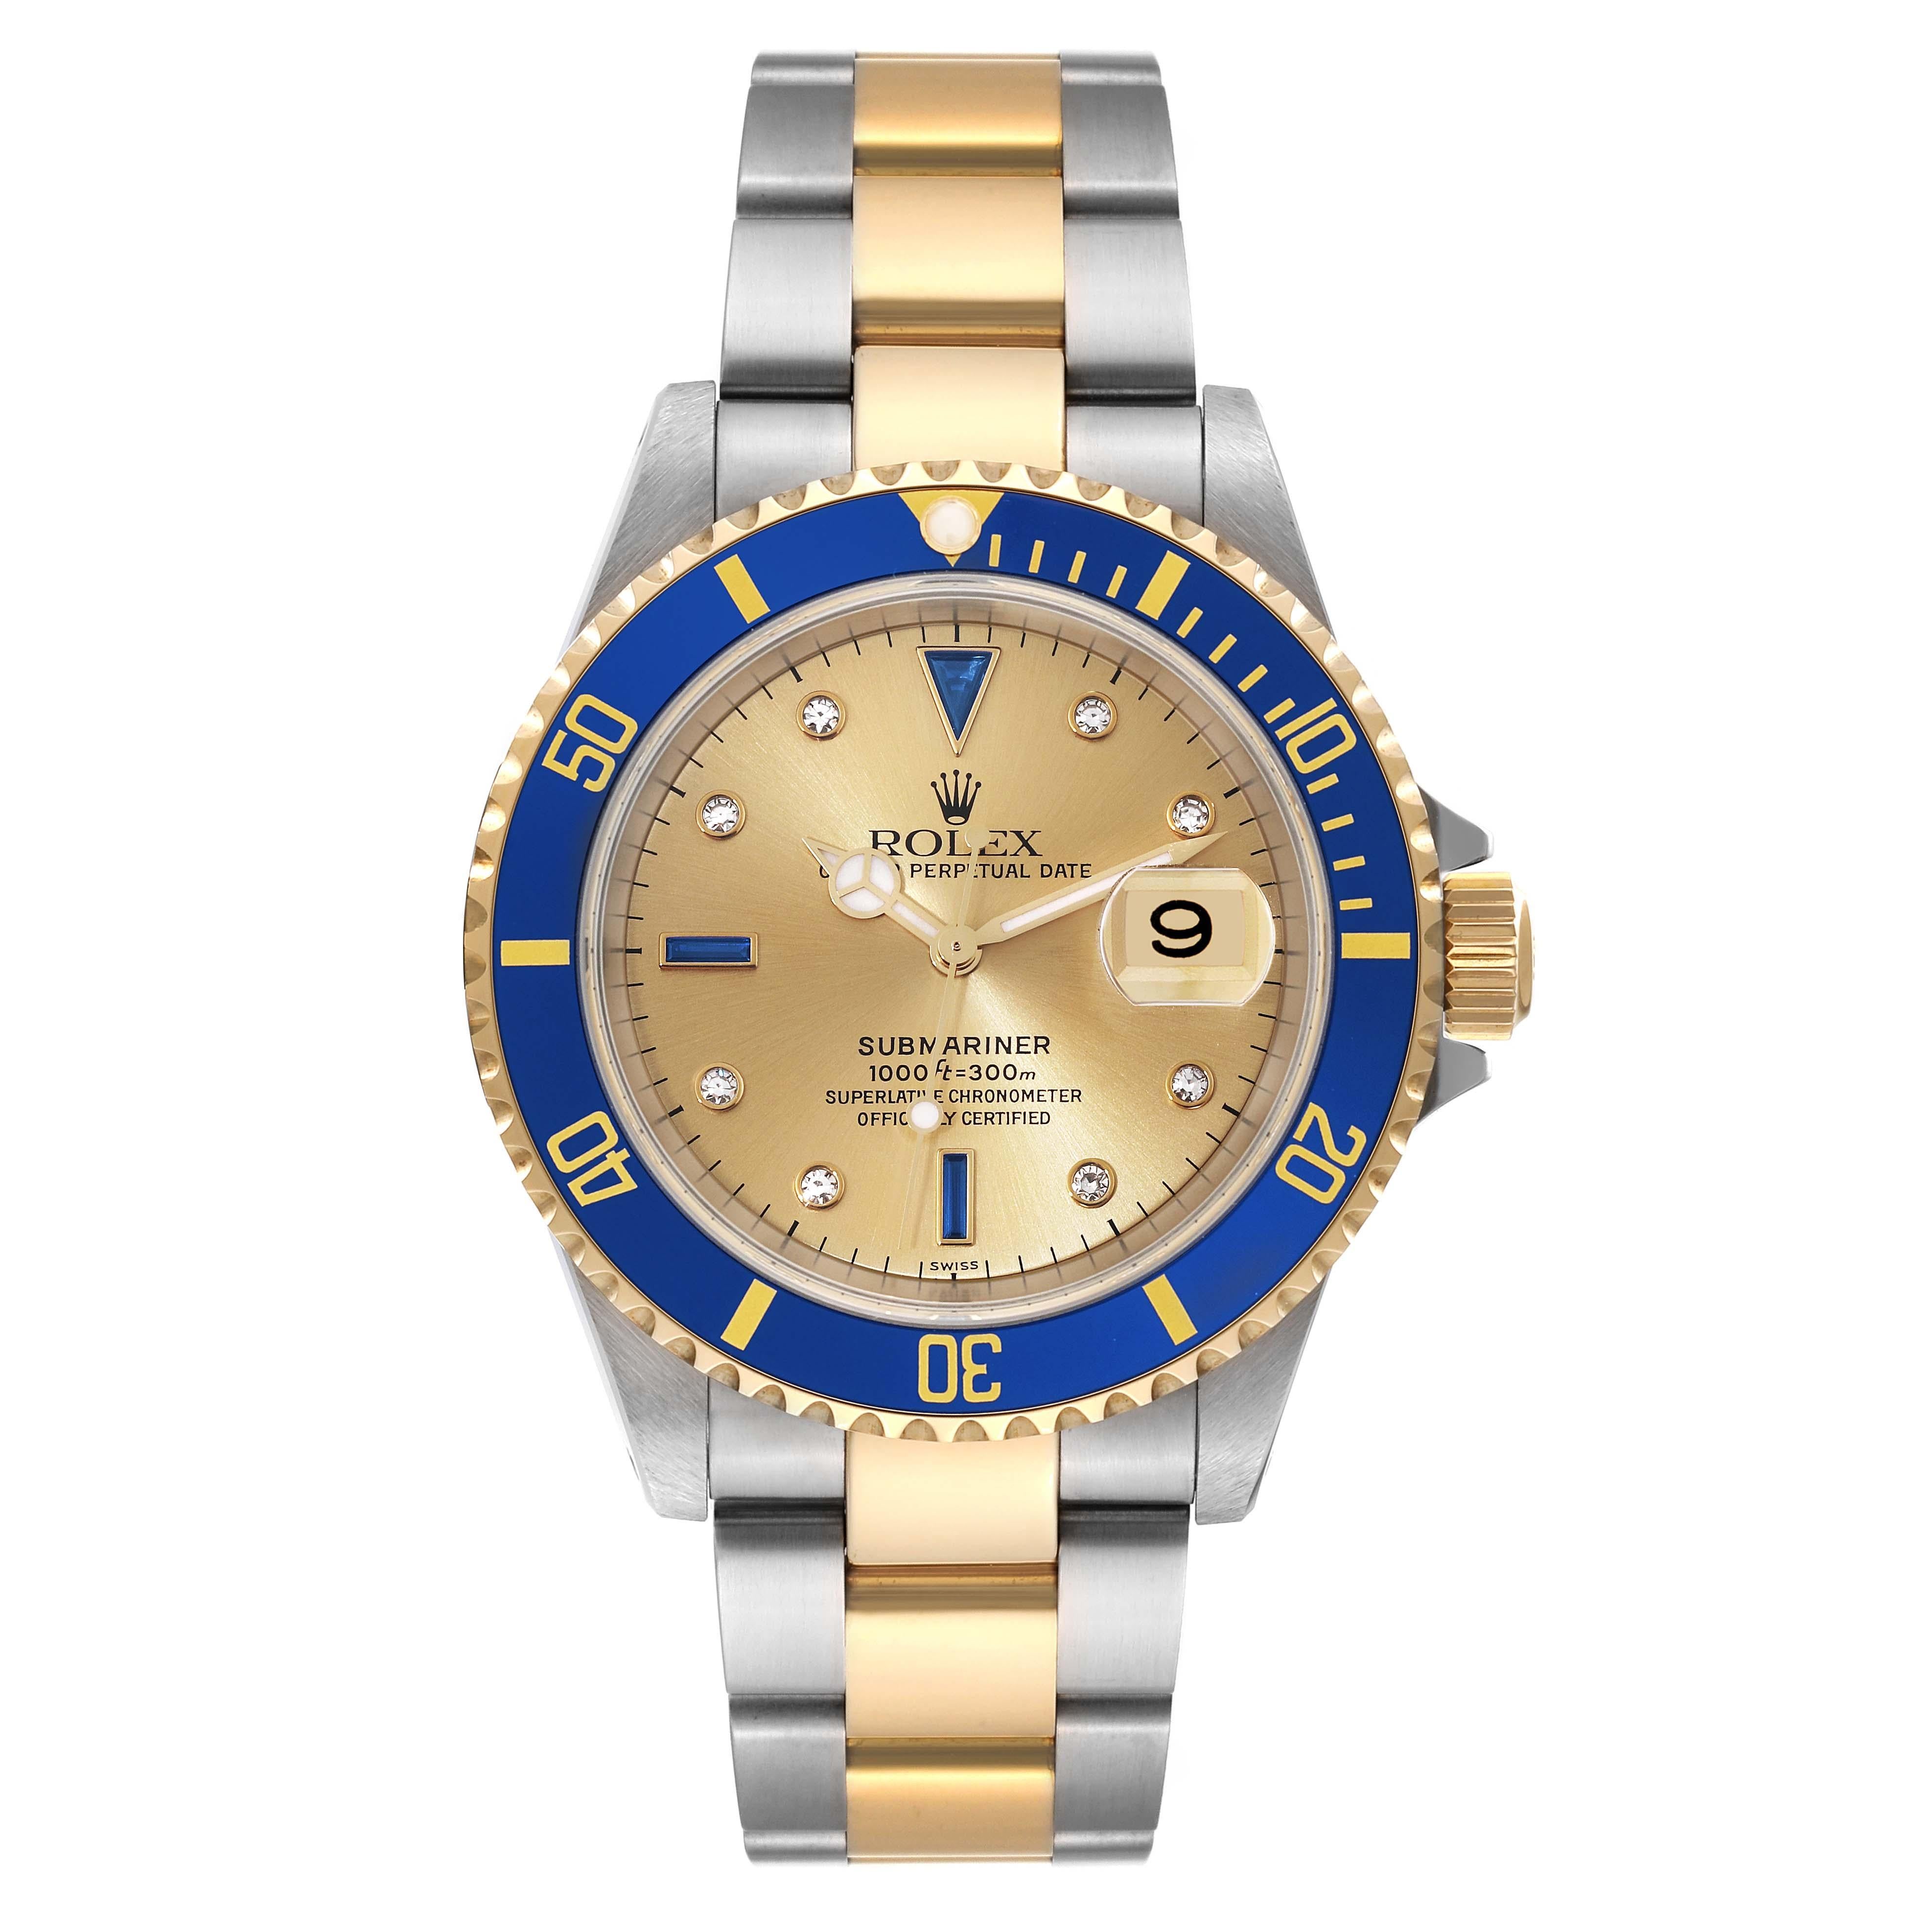 Rolex Submariner Steel Yellow Gold Diamond Serti Dial Watch 16613 Unworn NOS. Officially certified chronometer automatic self-winding movement. Stainless steel and 18k yellow gold case 40 mm in diameter. Rolex logo on the crown. Blue insert special